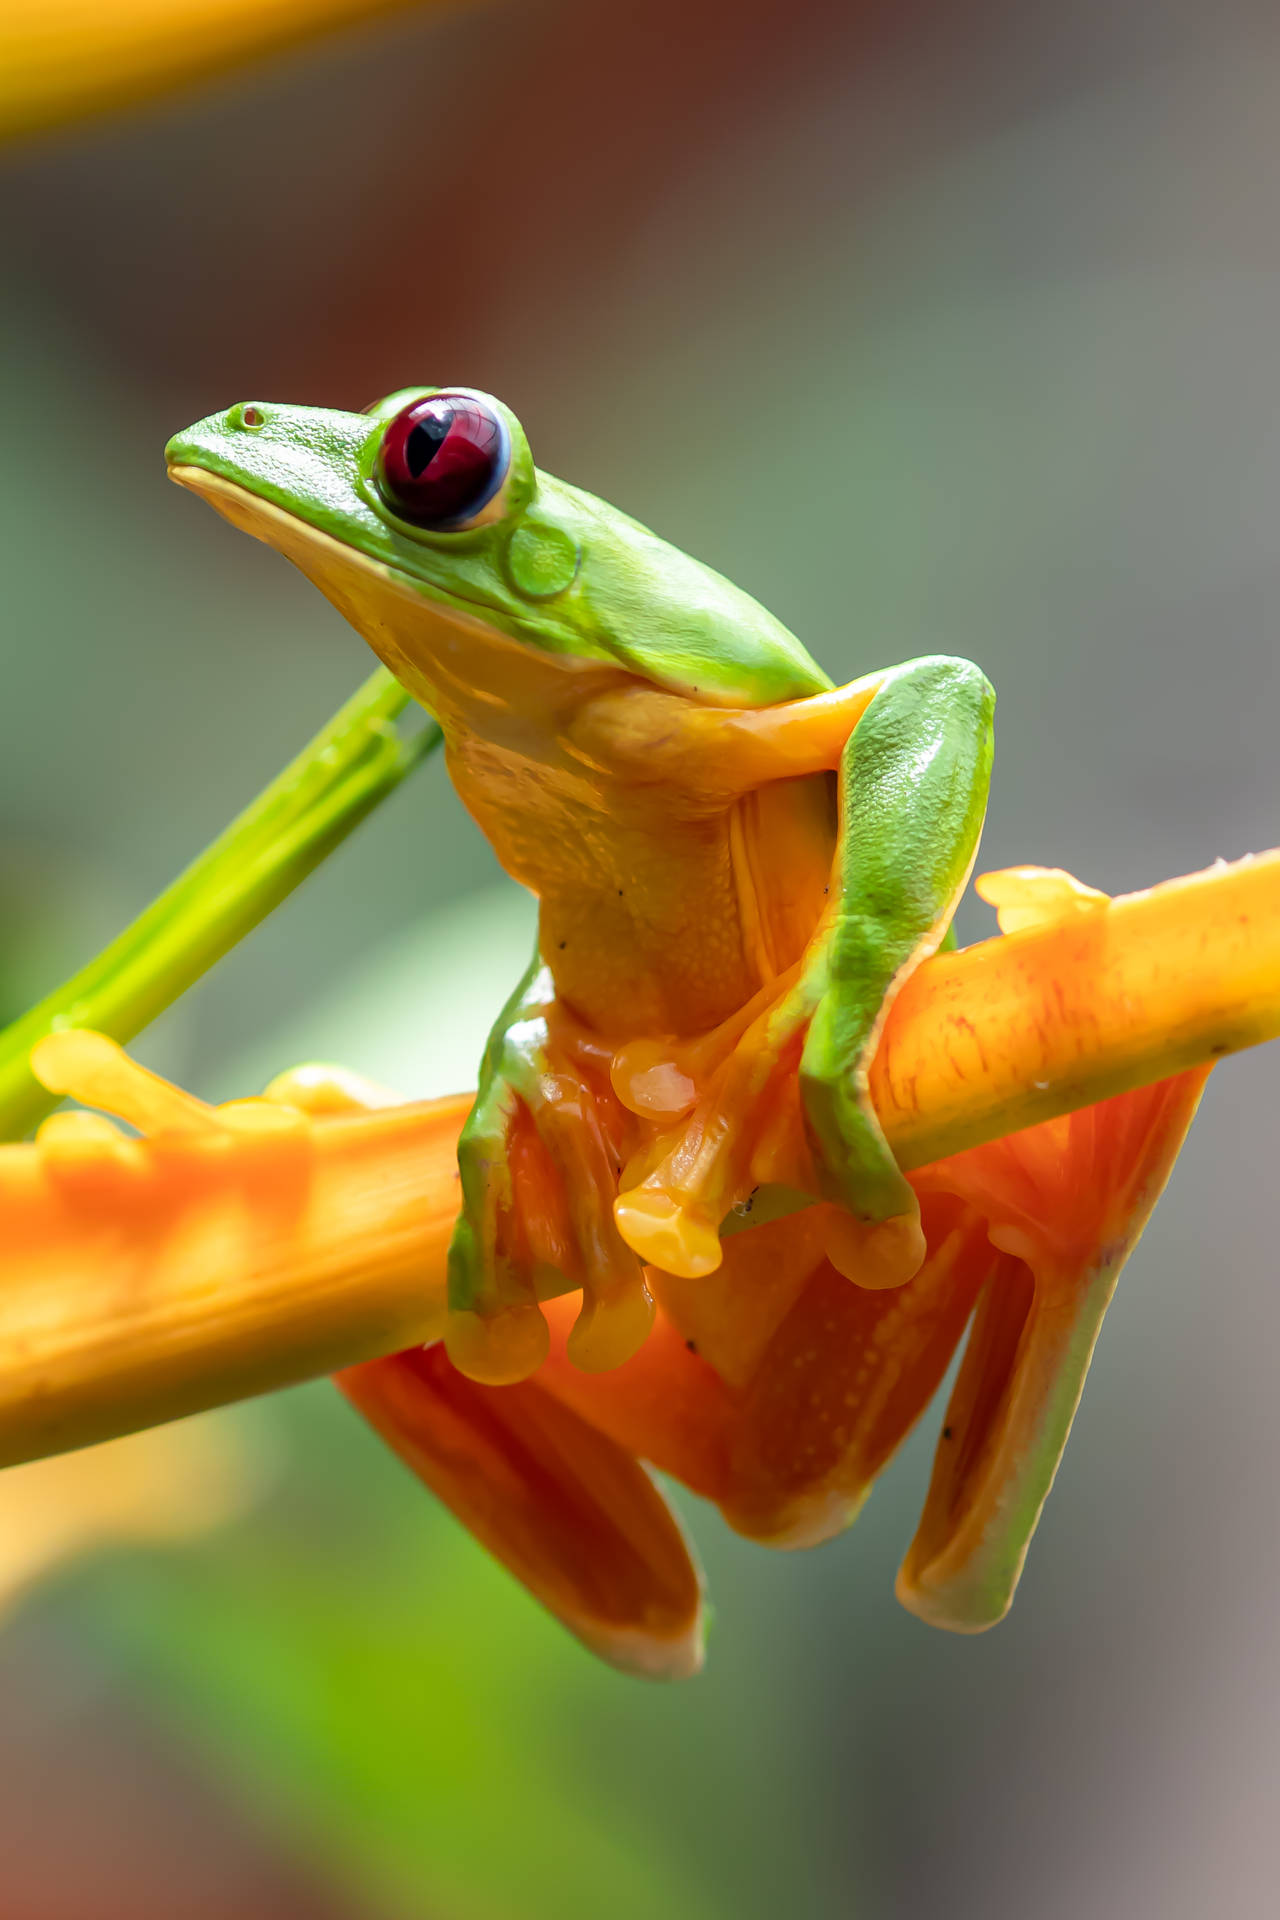 Frog 2137X3206 Wallpaper and Background Image